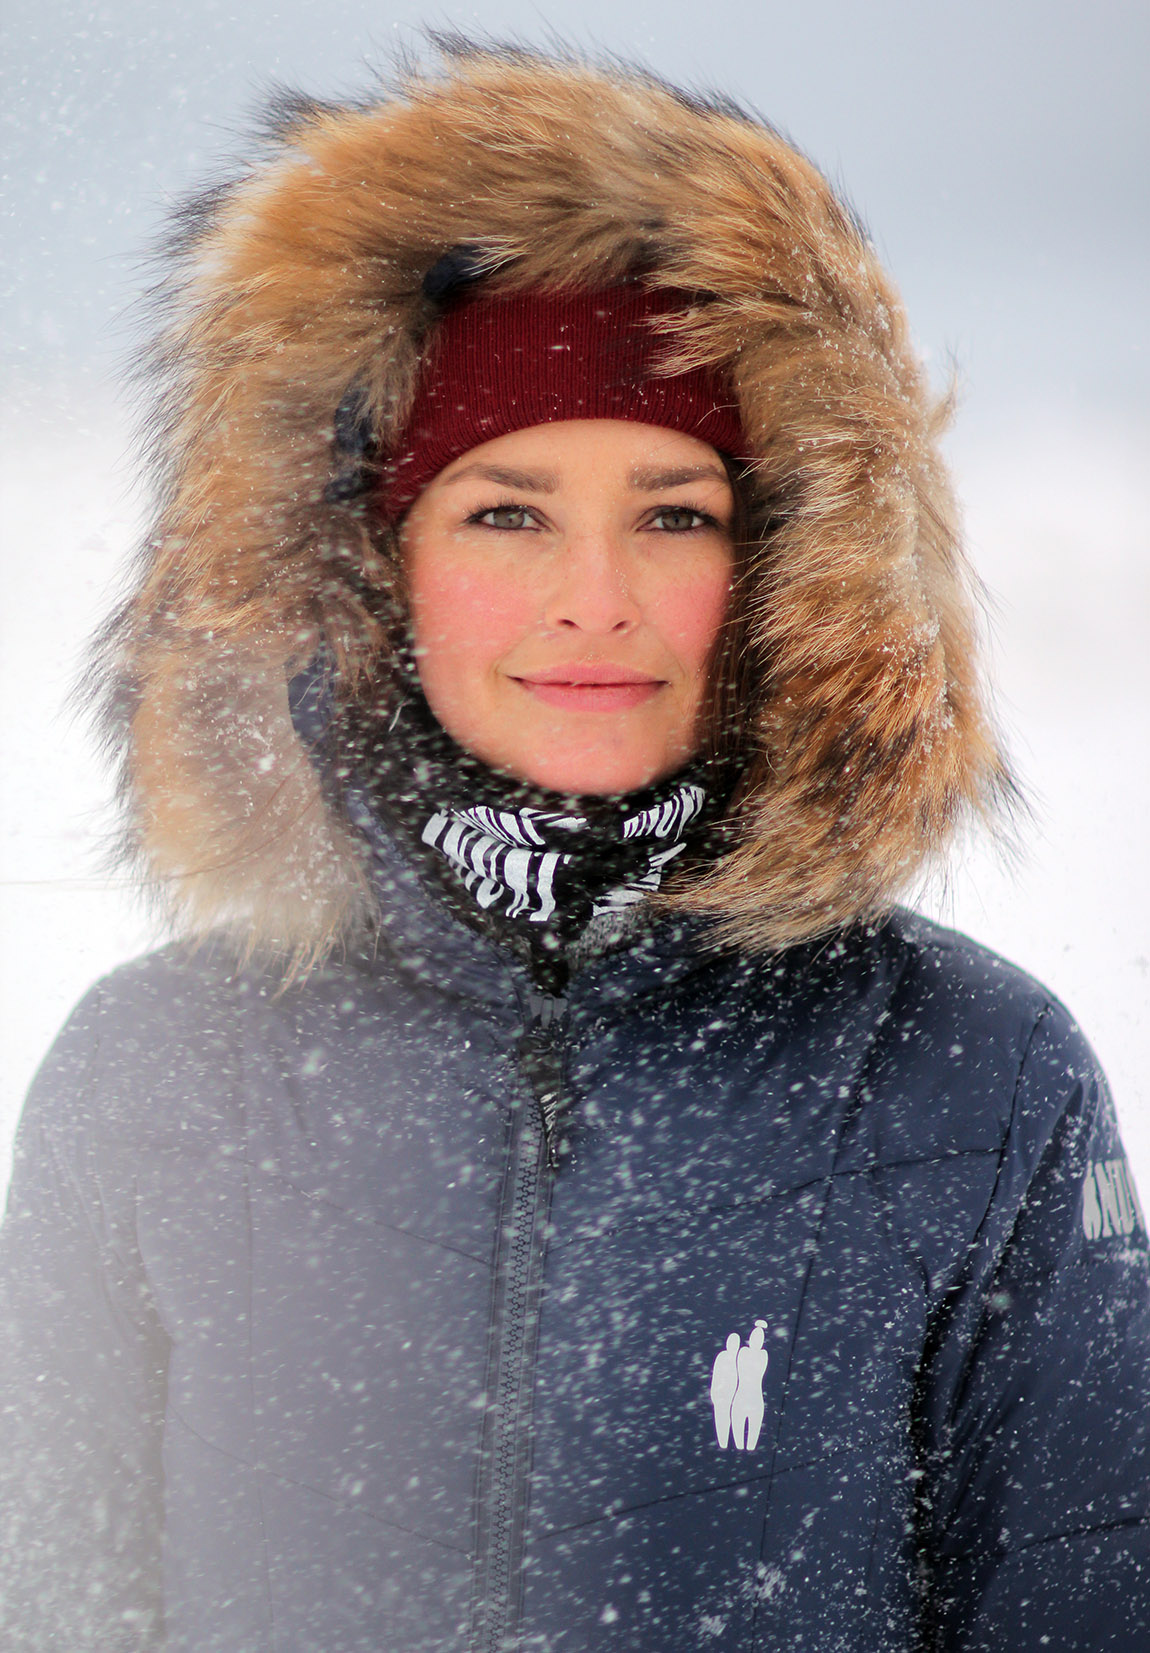 The outdoor wear from Inuit Quality Clothes of Greenland is inspired by Greenland’s harsh climate and magnificent nature.